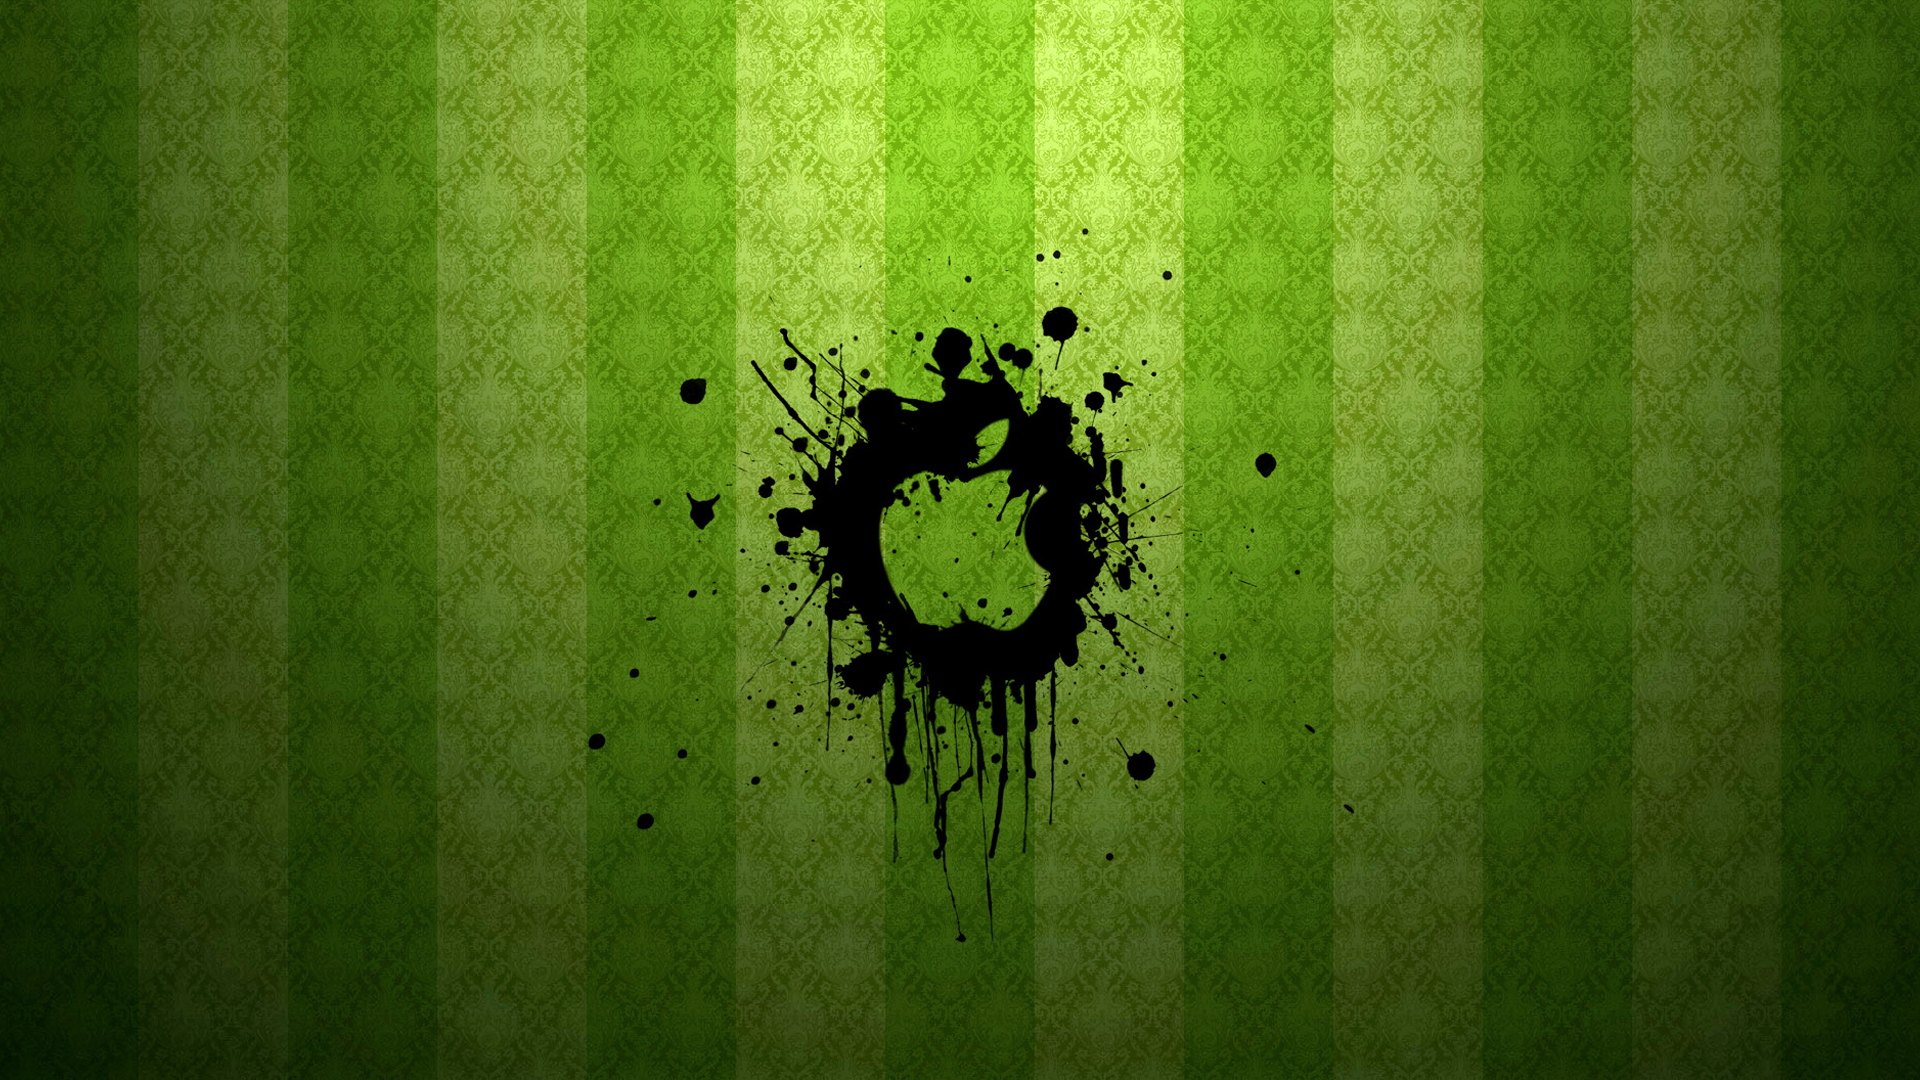 Apple graffiti theme wallpaper Green Backgrounds Pictures and images